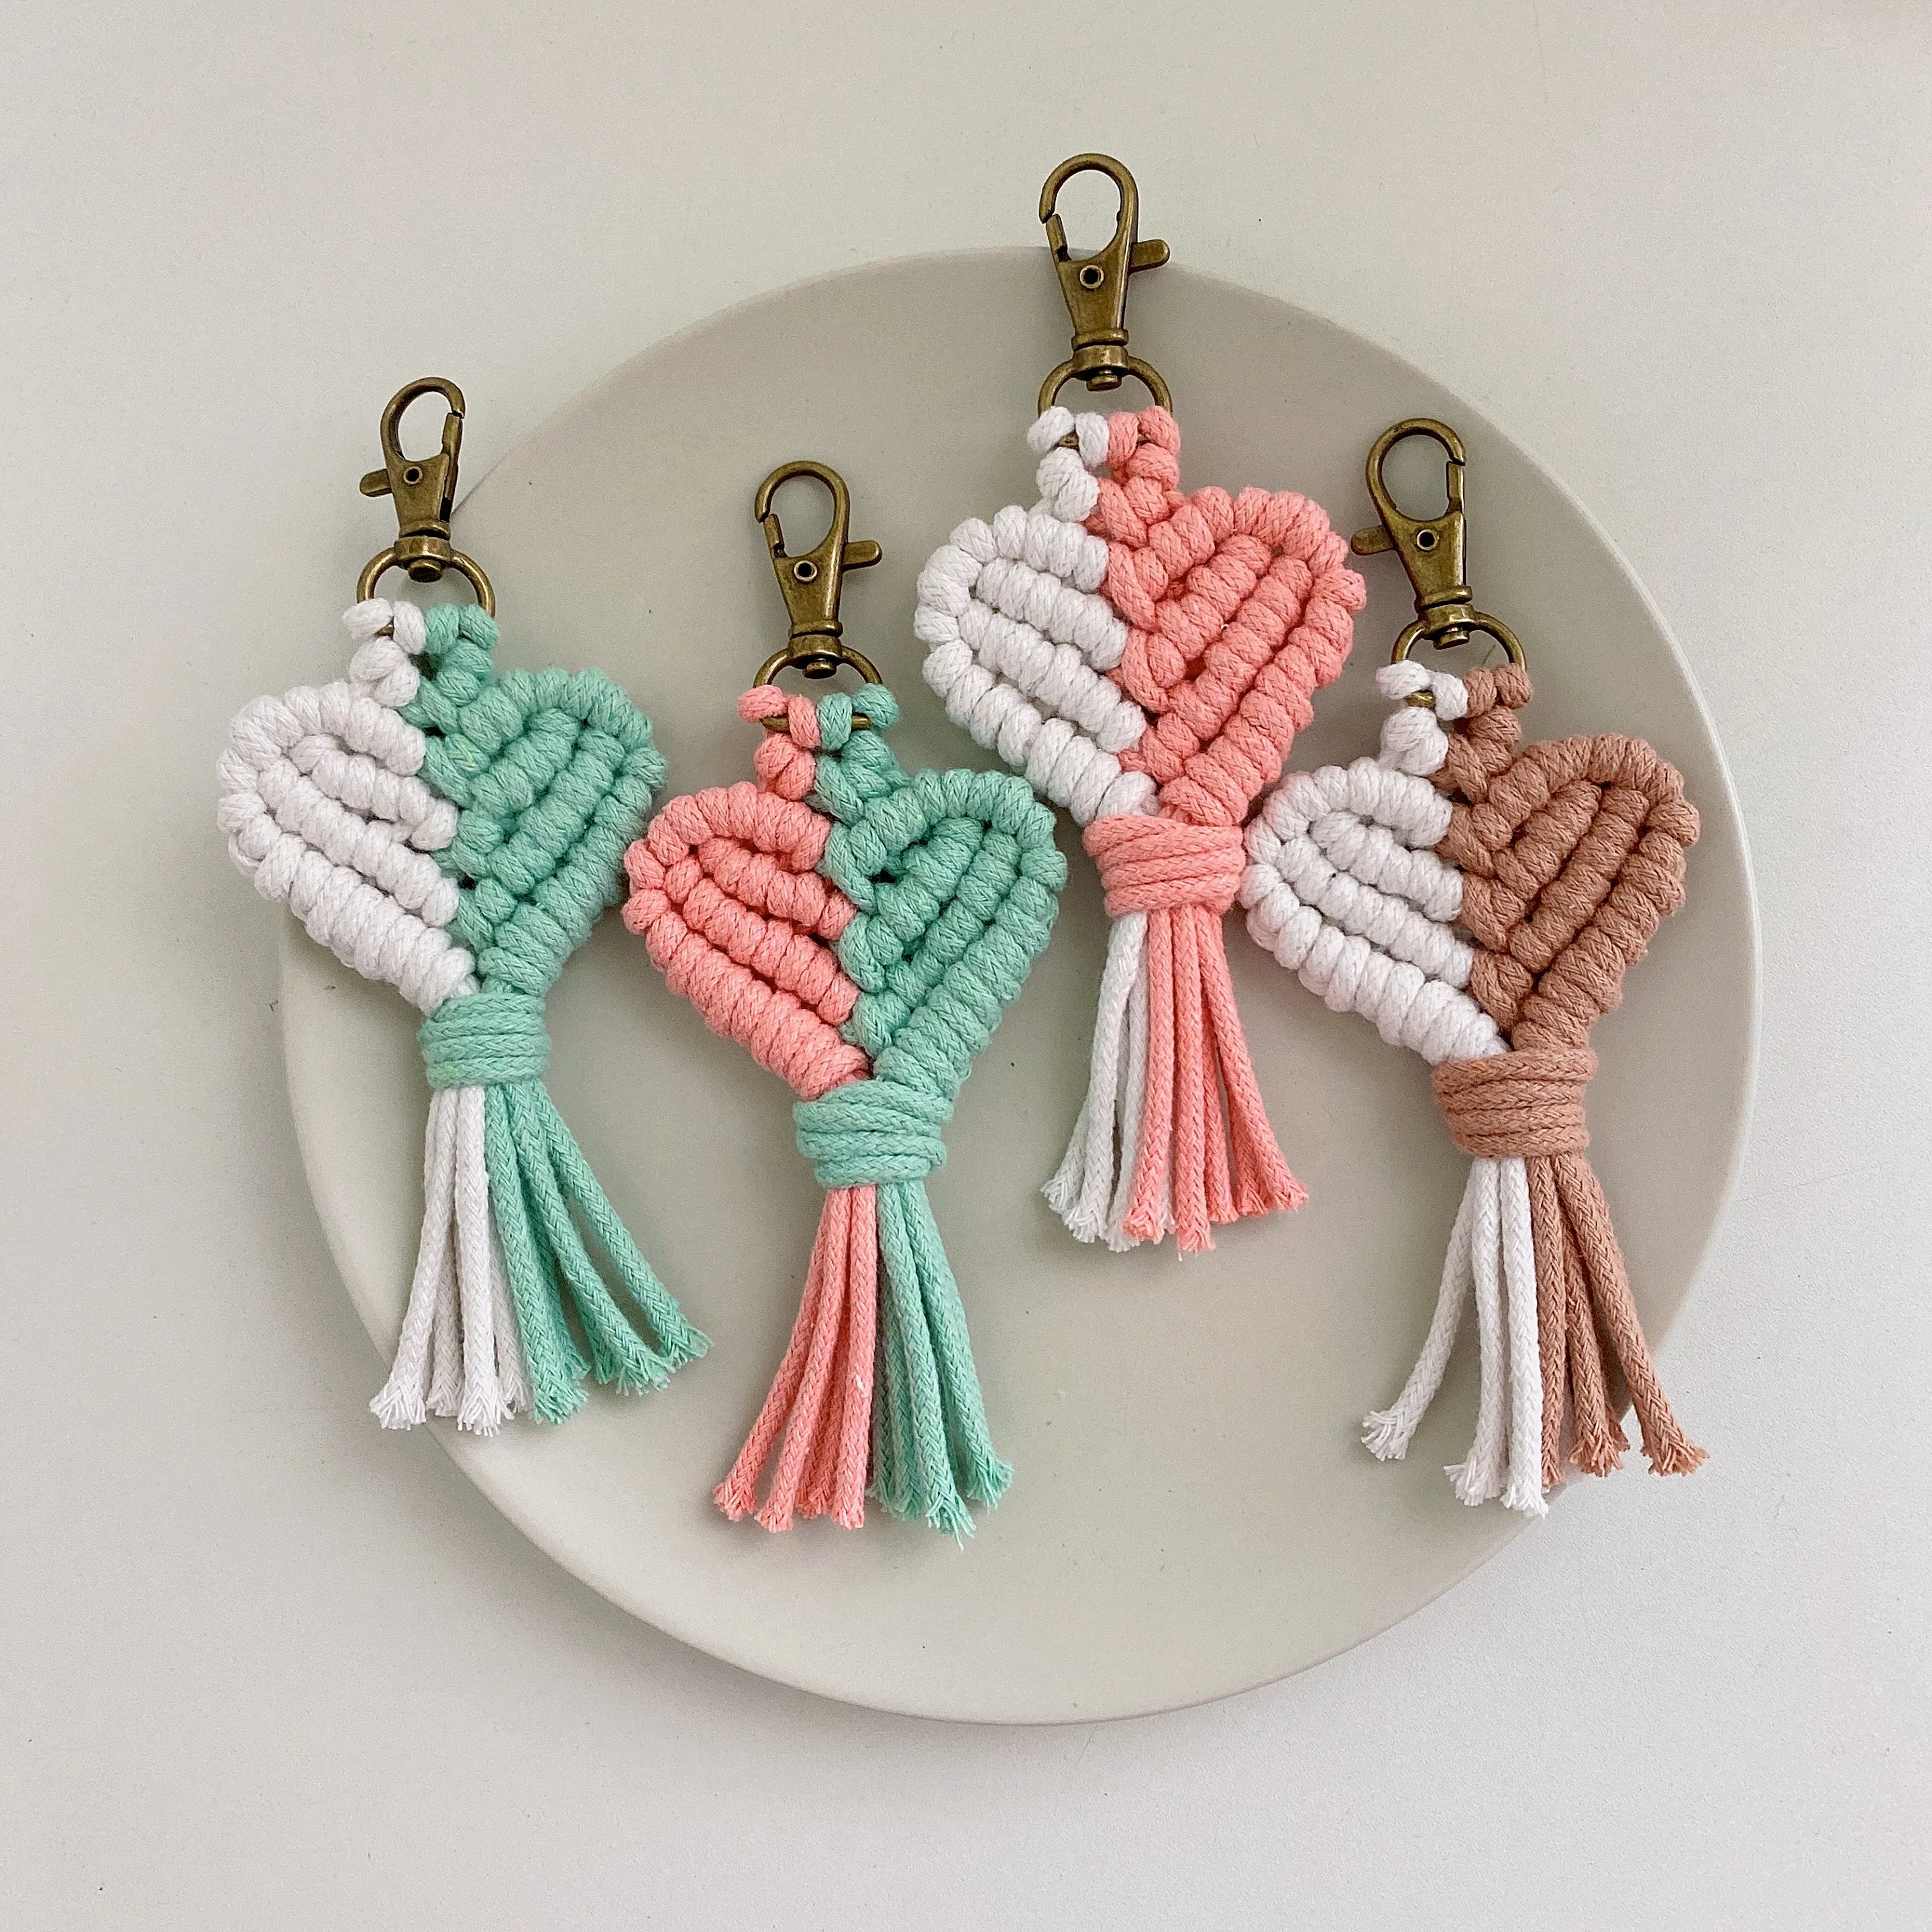 Macrame Hobo Keychain Handmade Heart-shaped Bag Pendant Gift Car Keys Mother's Day gift Fashion Jewelry Accessories Wholesale flyingbee fashion yoga painting art lanyards for keys id card pass gym mobile phone usb badge holder diy hang rope x2119